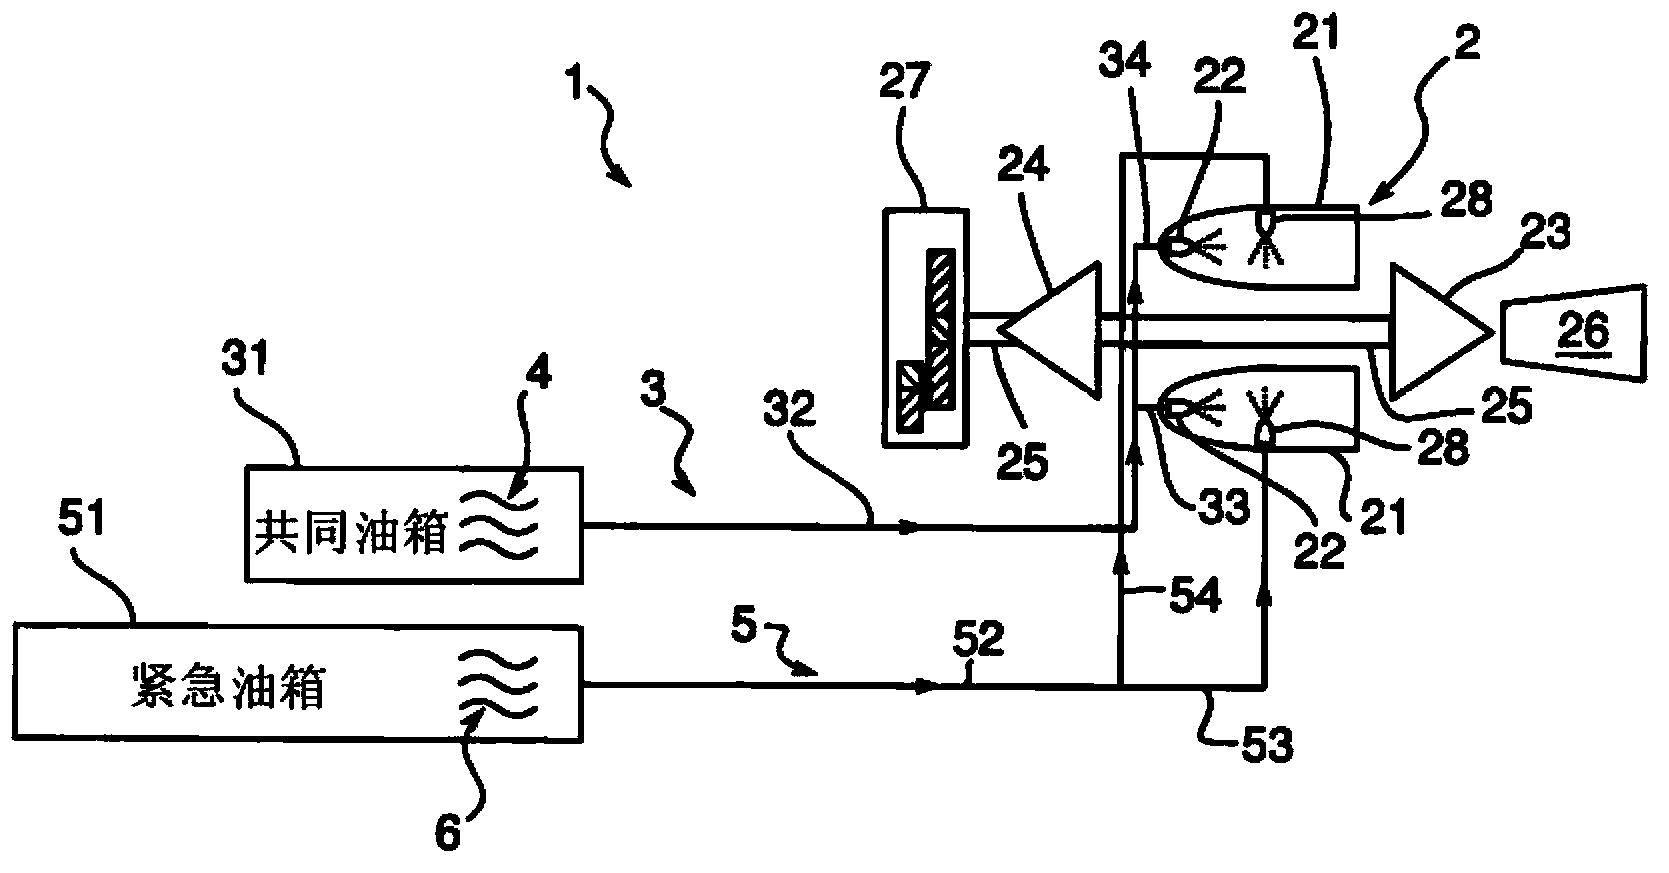 Auxiliary power supply process by an auxiliary power group and corresponding architecture